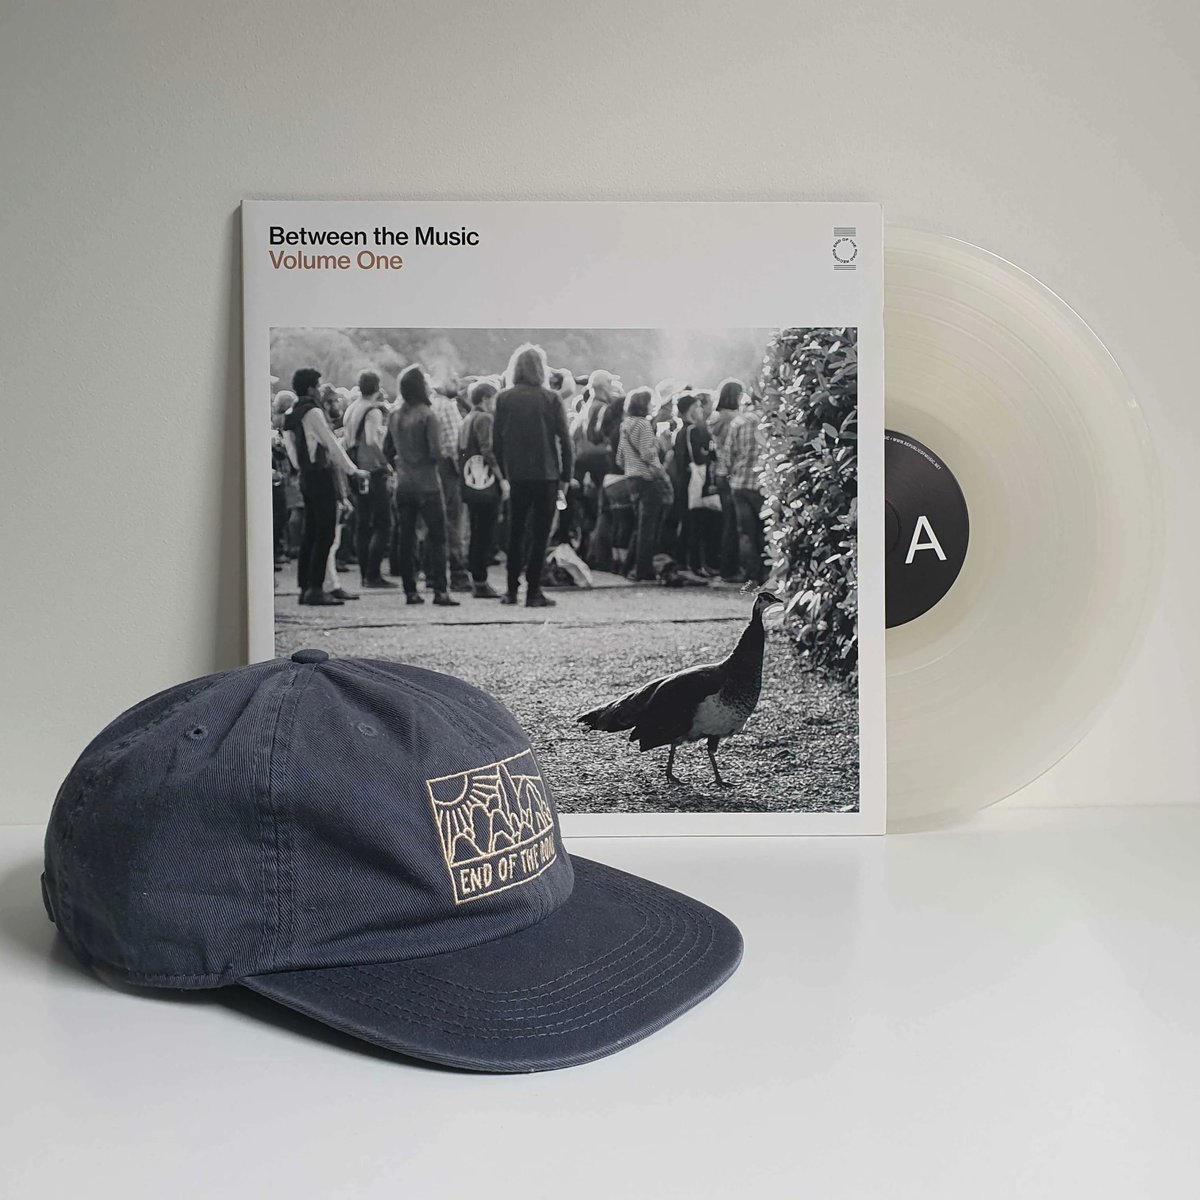 We added some stuff to our online shop this week including a brand new bundle of your favourite #EOTR2022 cap + Between The Music Vol. 1 LP. Head here for more details: buff.ly/3SRqYZB